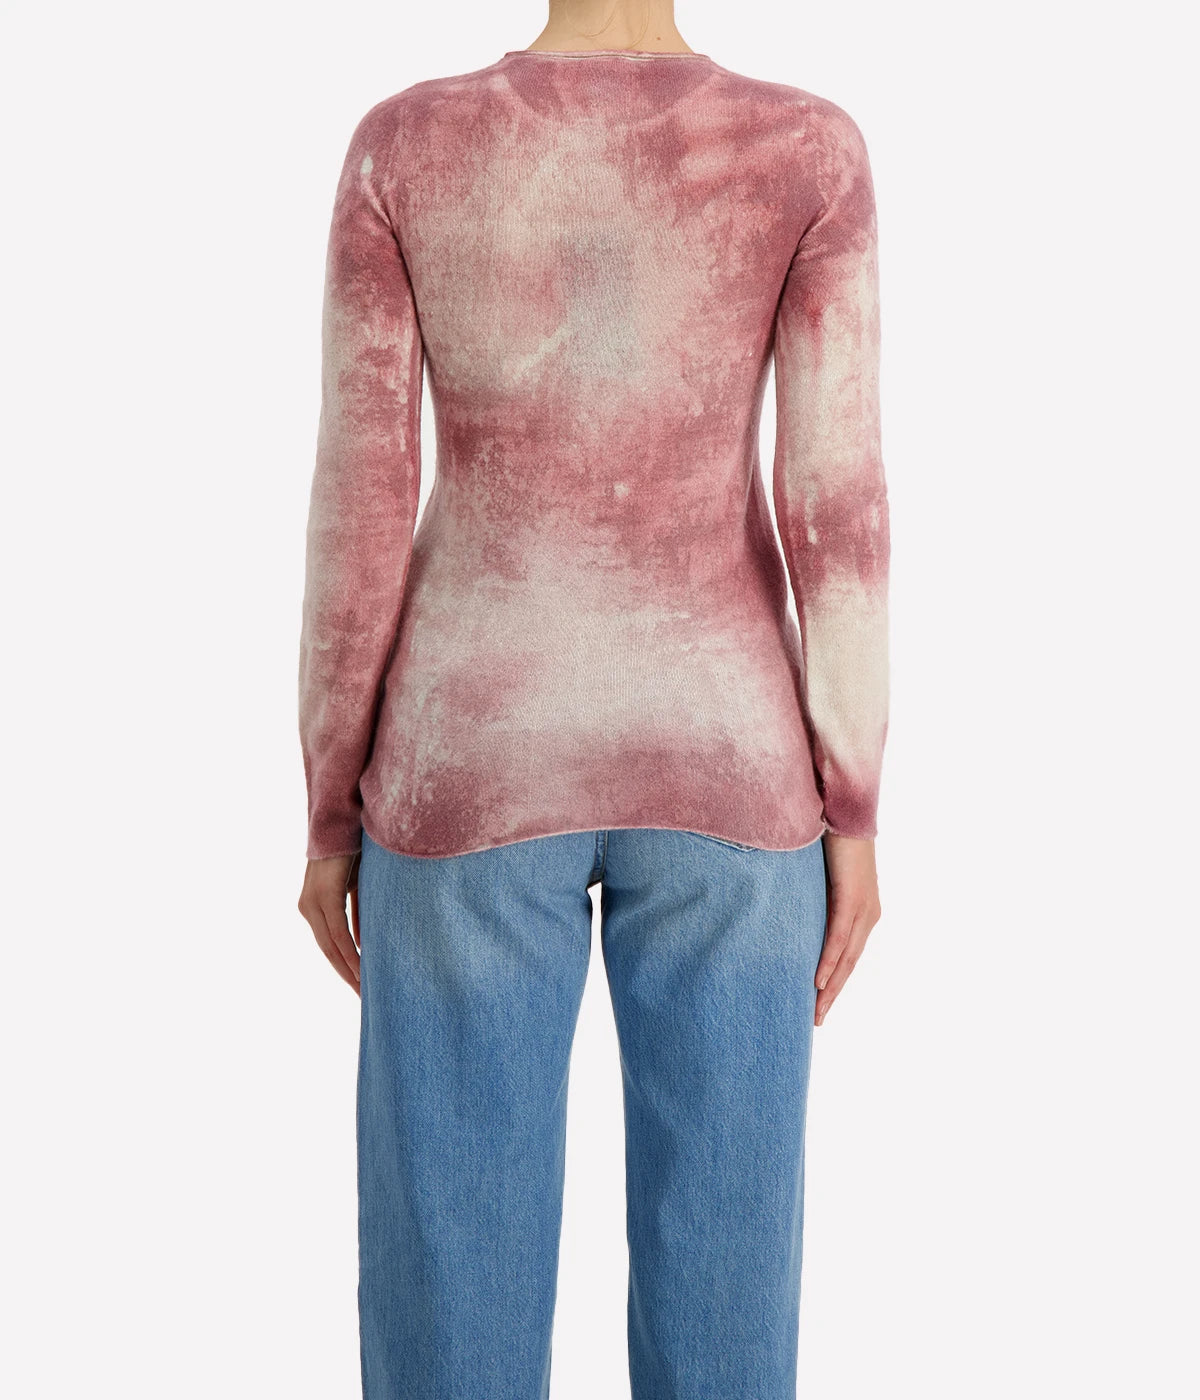 Marmo Effect Light Cashmere Round Neck in English Rose